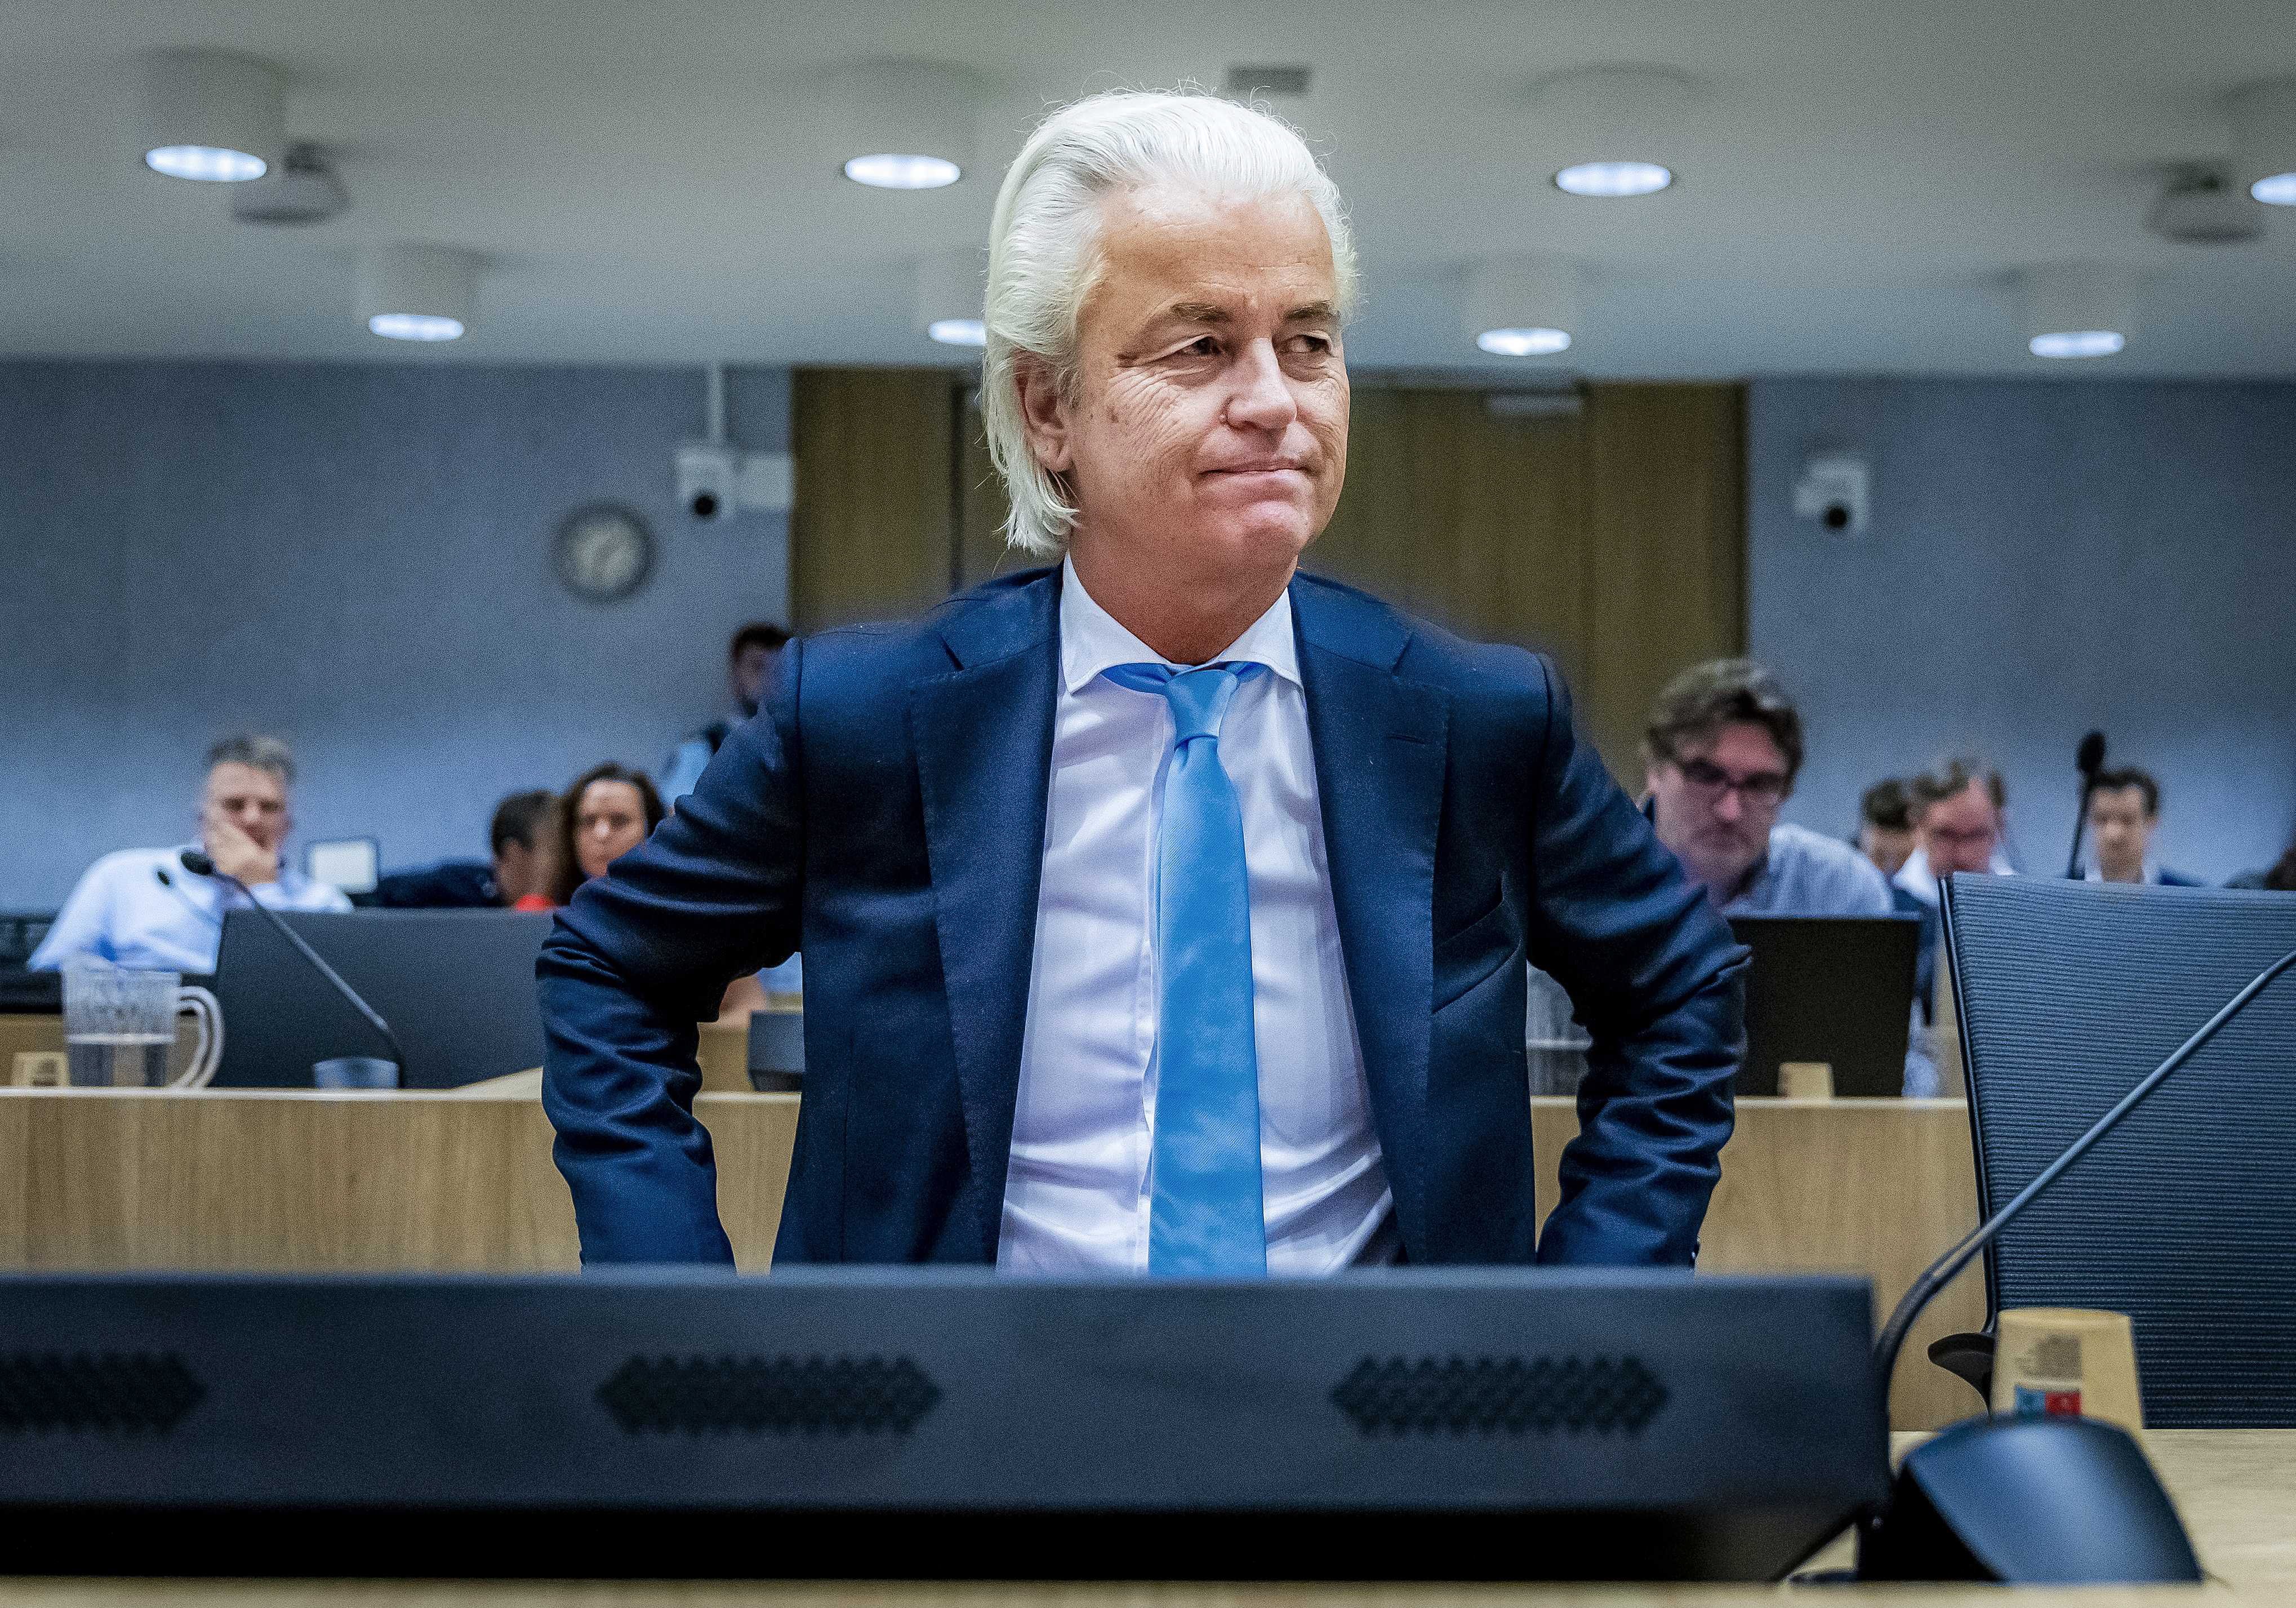 Dutch PVV leader Geert Wilders attends a criminal case in the court of Schiphol. The criminal case hearing is against the Pakistani cricketer Khalid Latif, who is said to have offered money in a video for the murder of Wilders, a member of Dutch Parliament. Photo: EPA-EFE